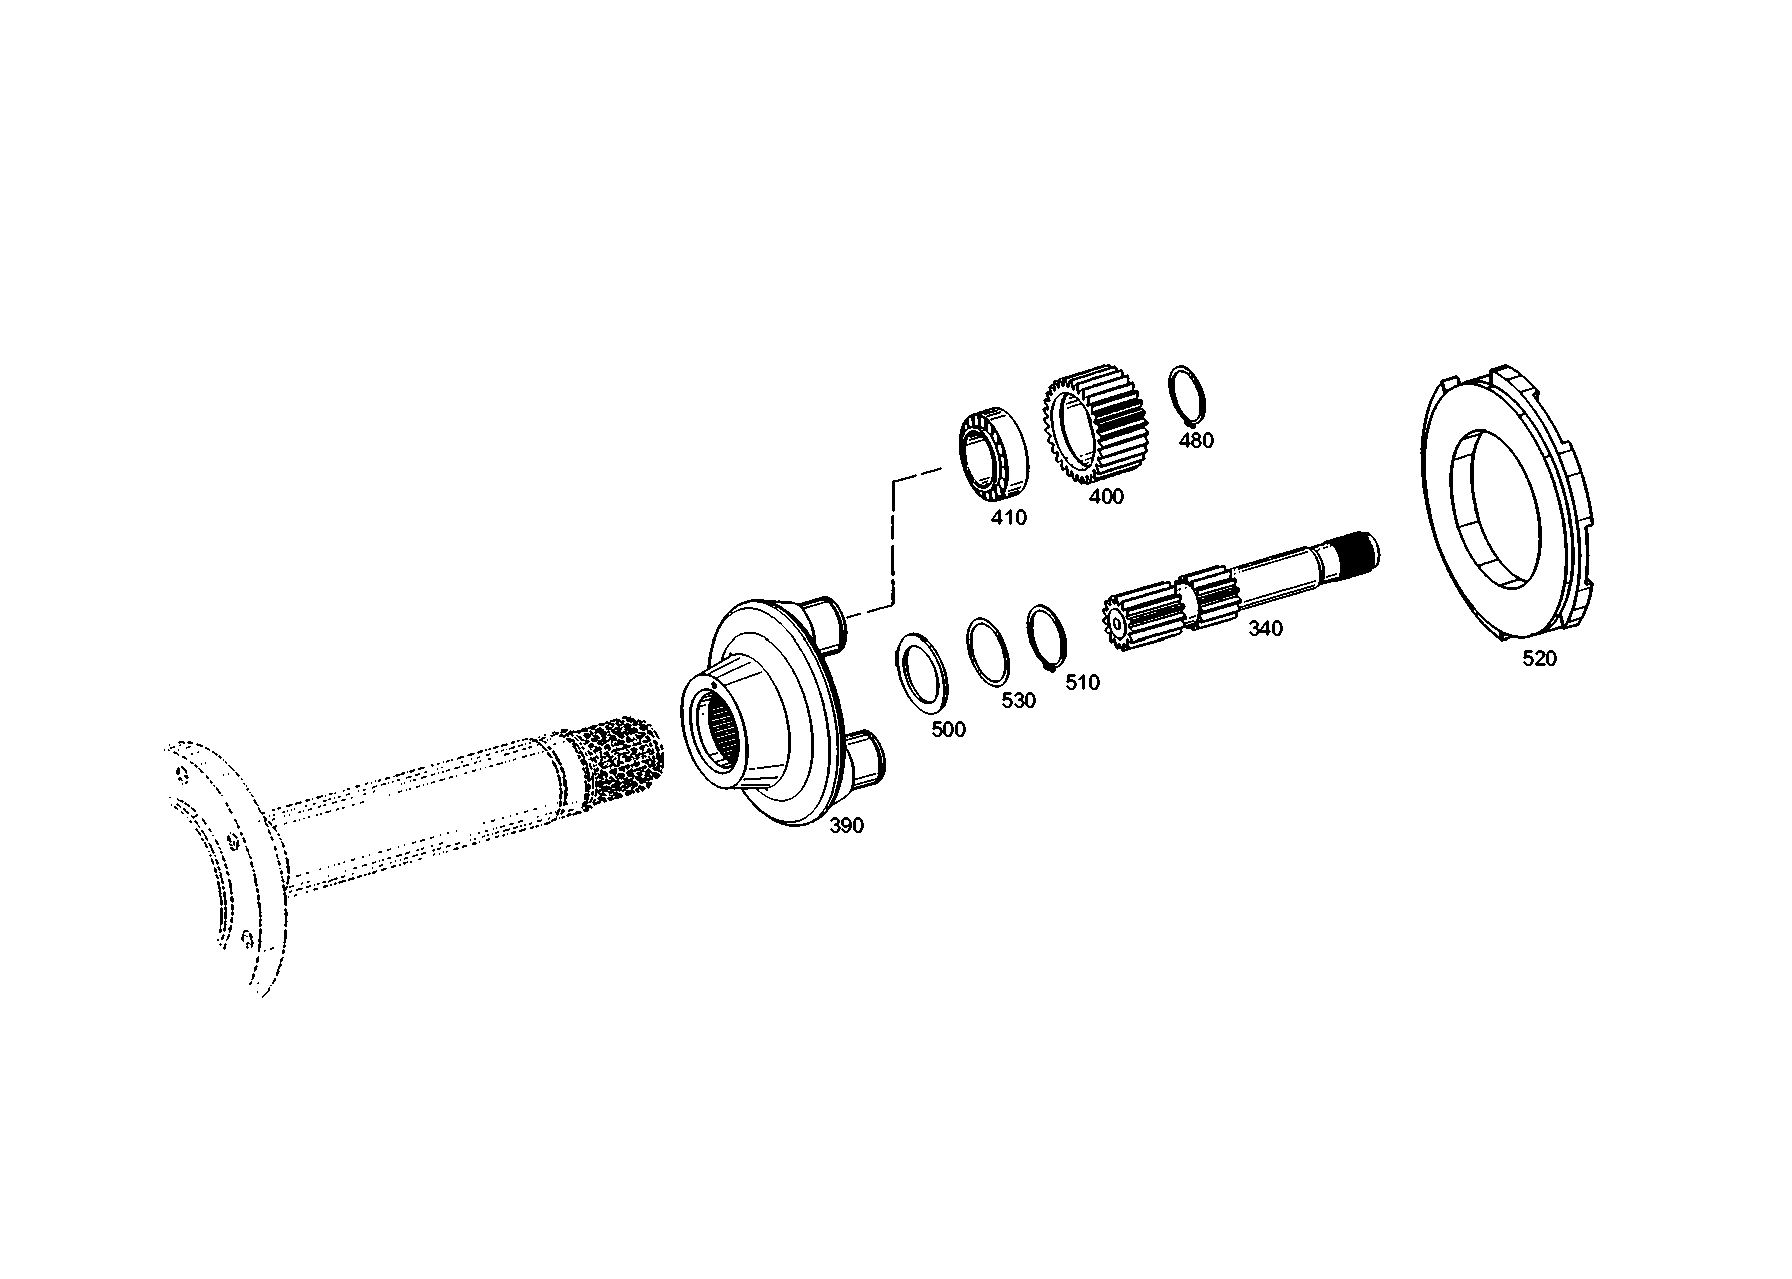 drawing for HAMM AG 1282387 - WASHER (figure 5)